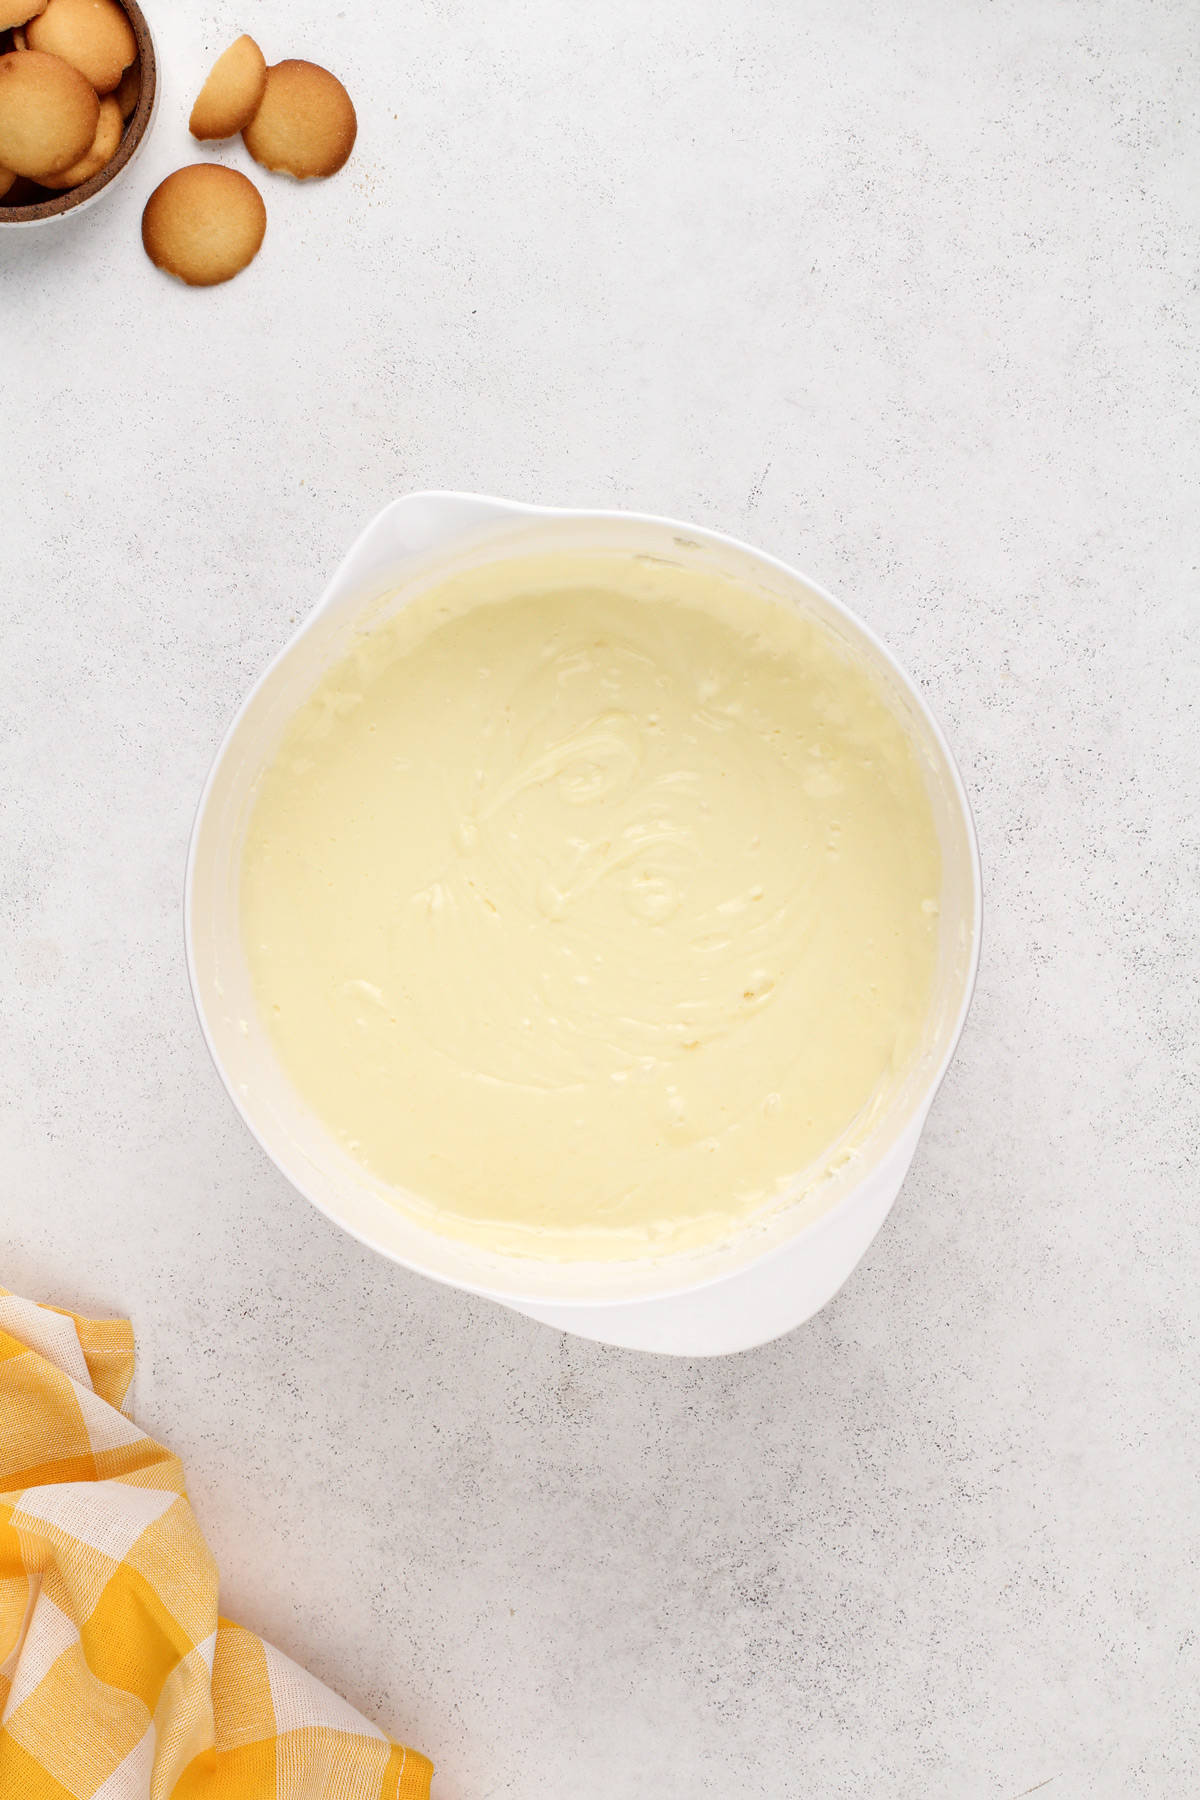 Cheesecake filling base in a white bowl.